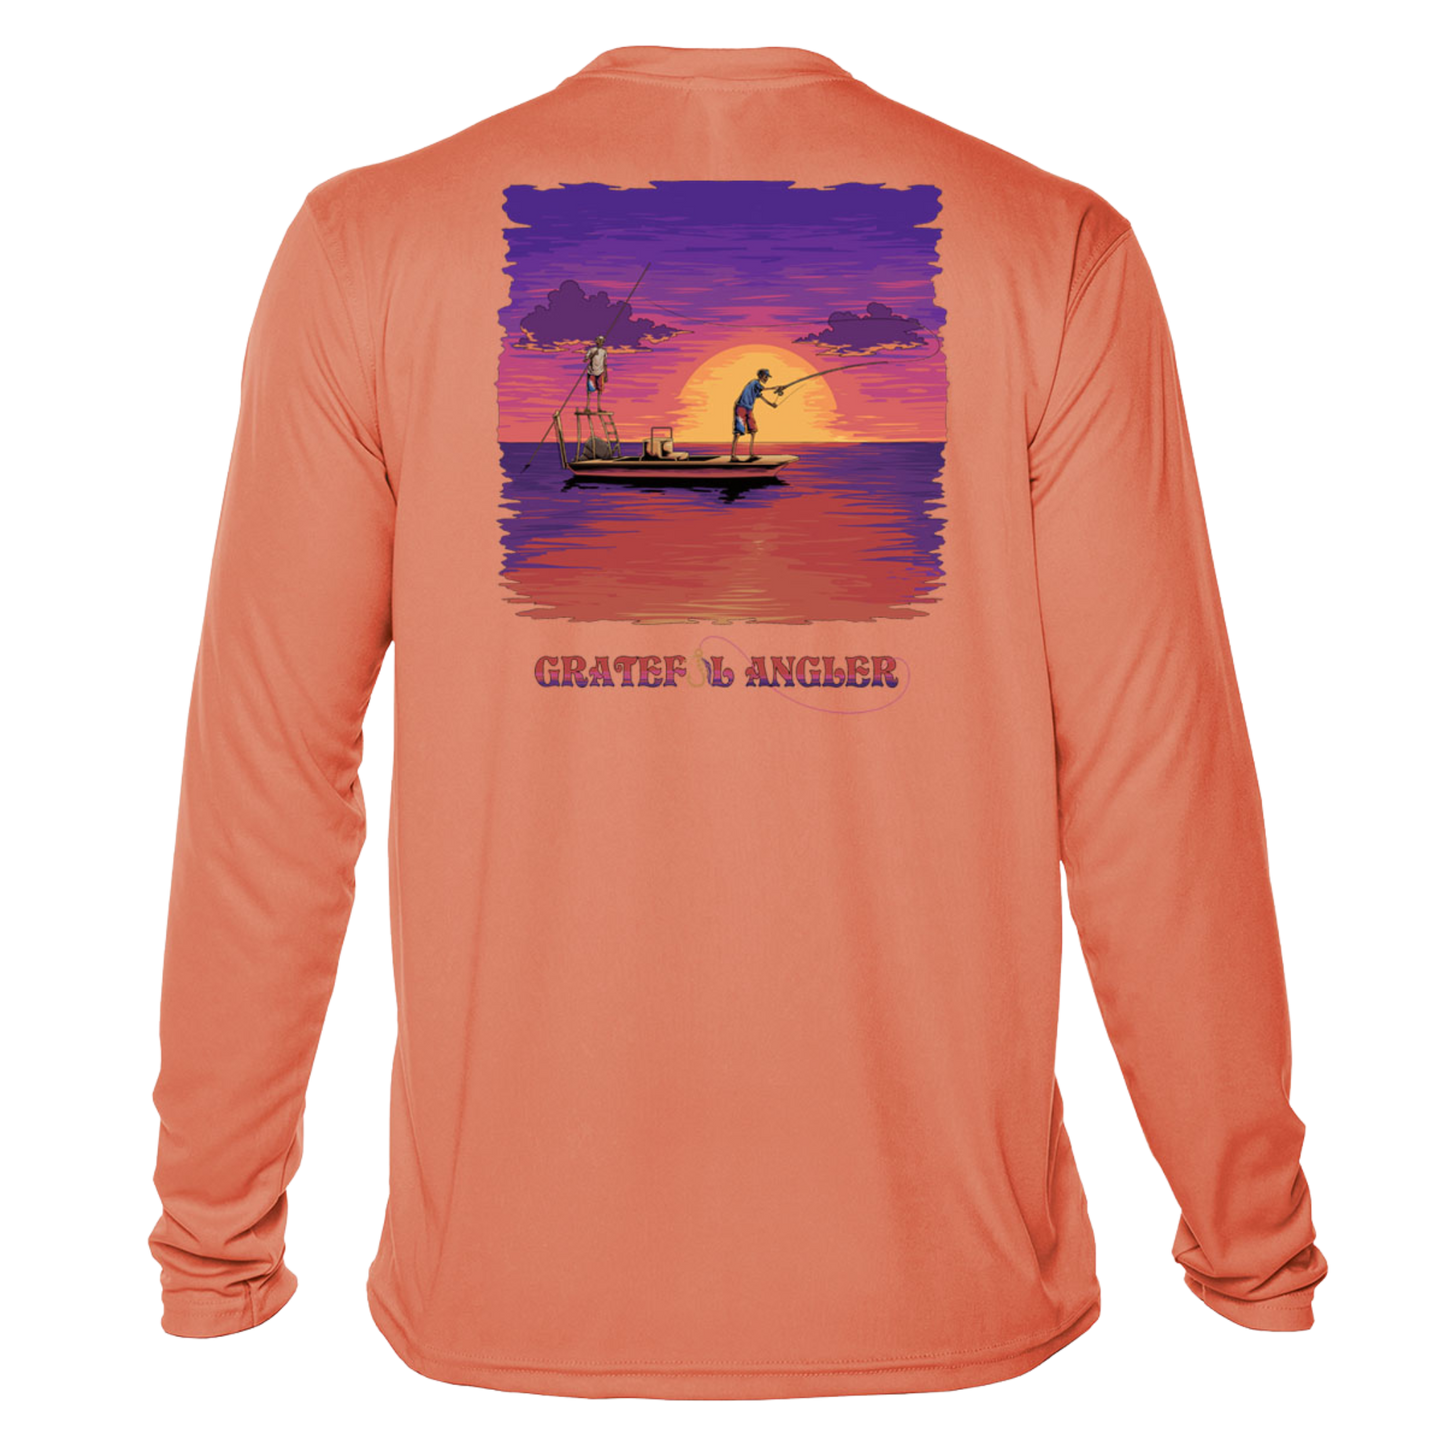 back of salmon Grateful Angler Skeleton Anglers UV Shirt showing two skeletons on a boat fishing in front of the sunset